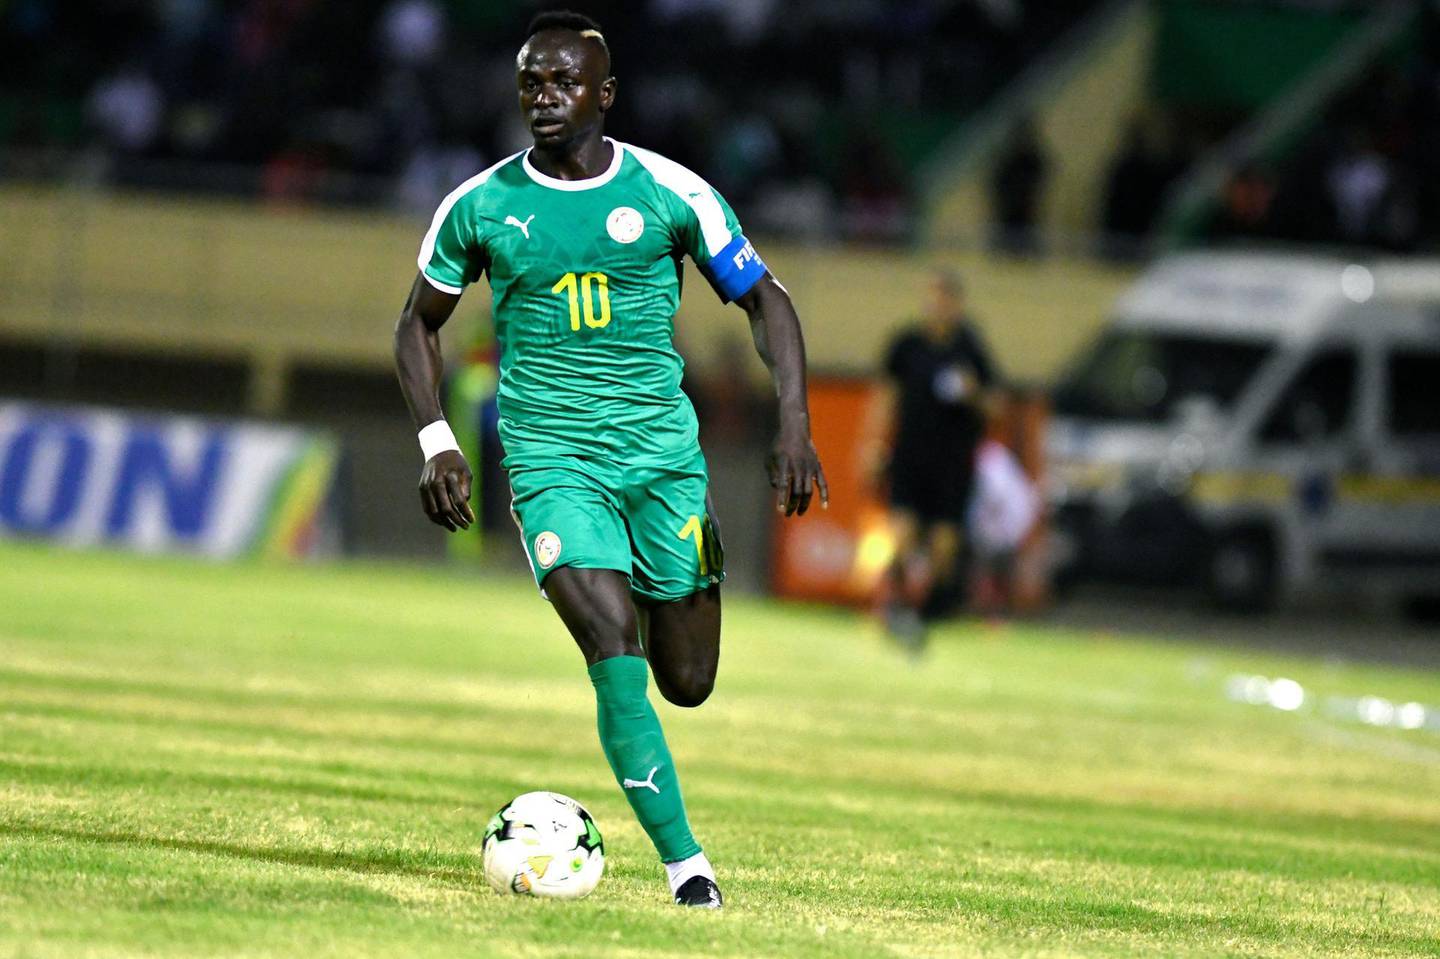 Senegal's forward Sadio Mane drives the ball during the 2019 African Cup of Nations Group A qualification football match between Senegal and Madagascar in Thies, on March 23, 2019. / AFP / SEYLLOU
